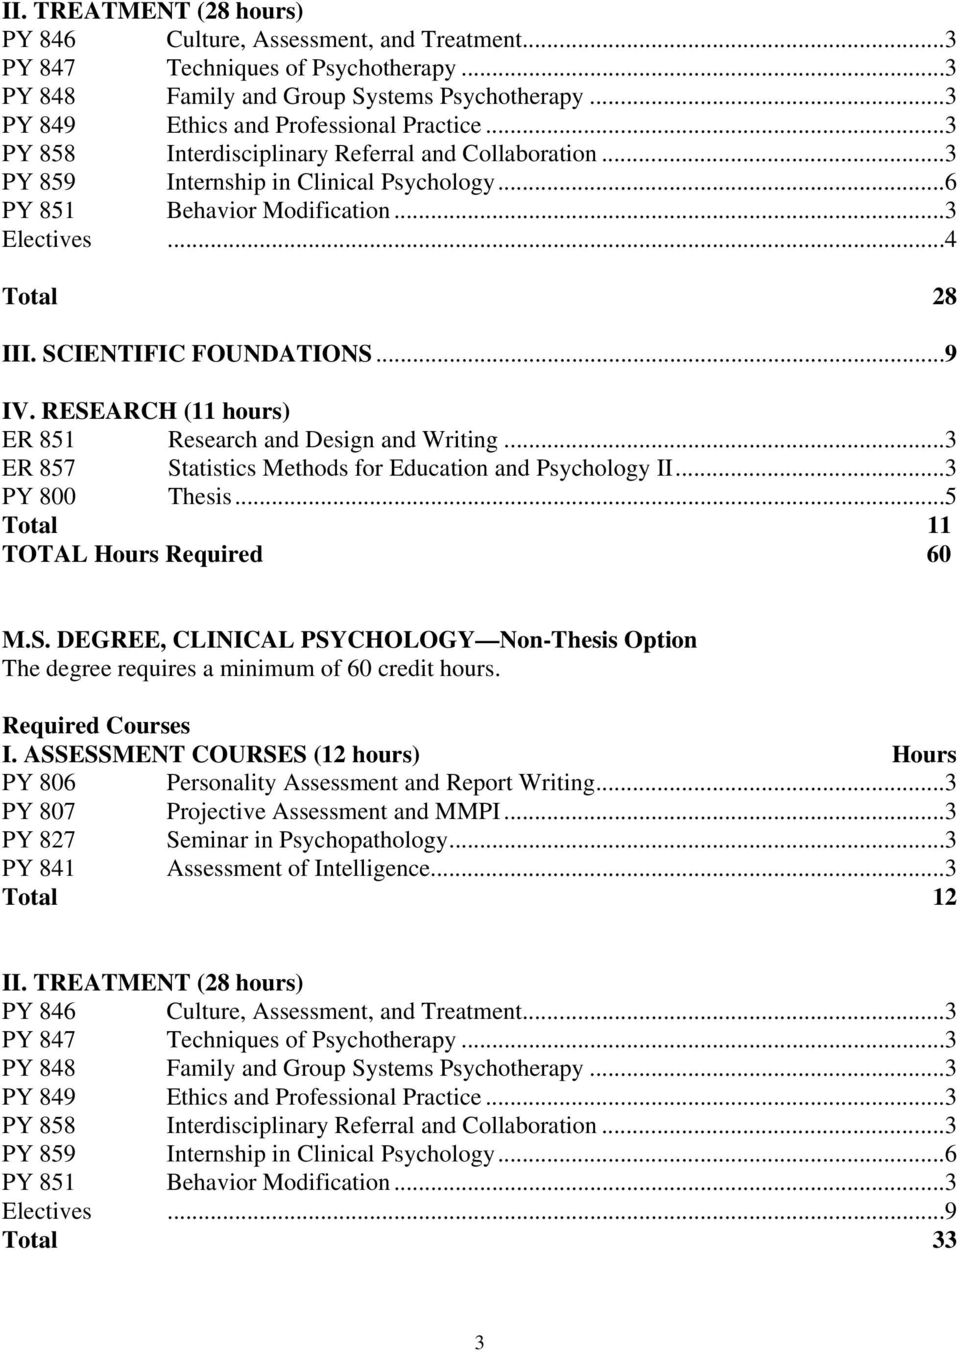 RESEARCH (11 hours) ER 851 Research and Design and Writing...3 ER 857 Statistics Methods for Education and Psychology II...3 PY 800 Thesis...5 Total 11 TOTAL Hours Required 60 M.S. DEGREE, CLINICAL PSYCHOLOGY Non-Thesis Option The degree requires a minimum of 60 credit hours.